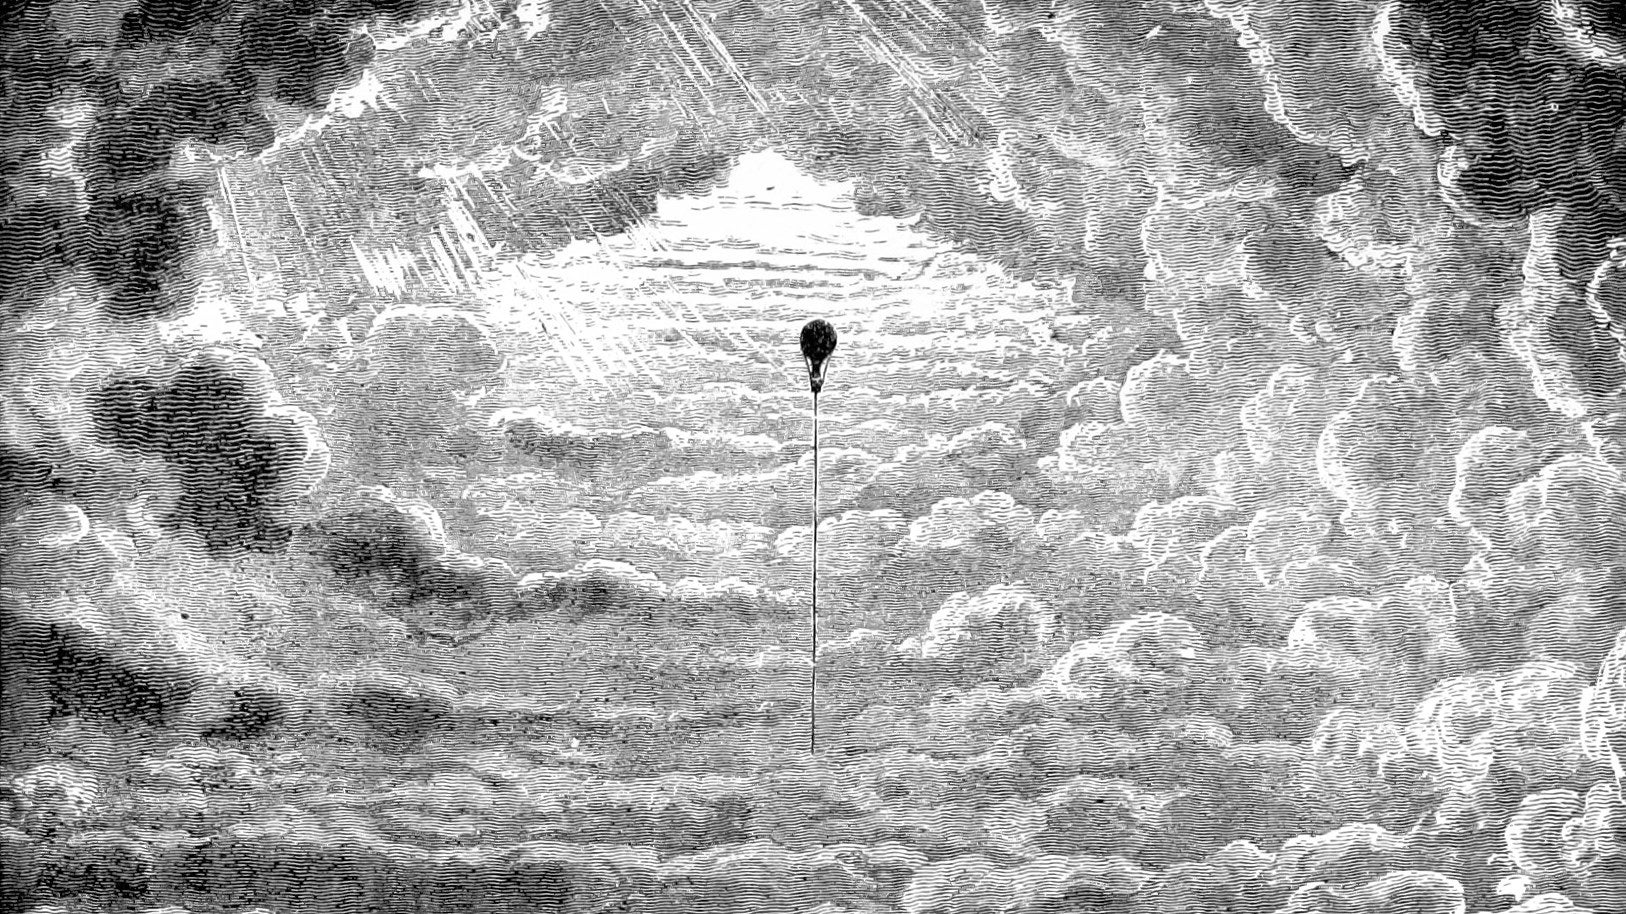 A balloon rises into thick clouds in an illustration from 'The Half Hour Library of Travel, Nature and Science for young readers'.